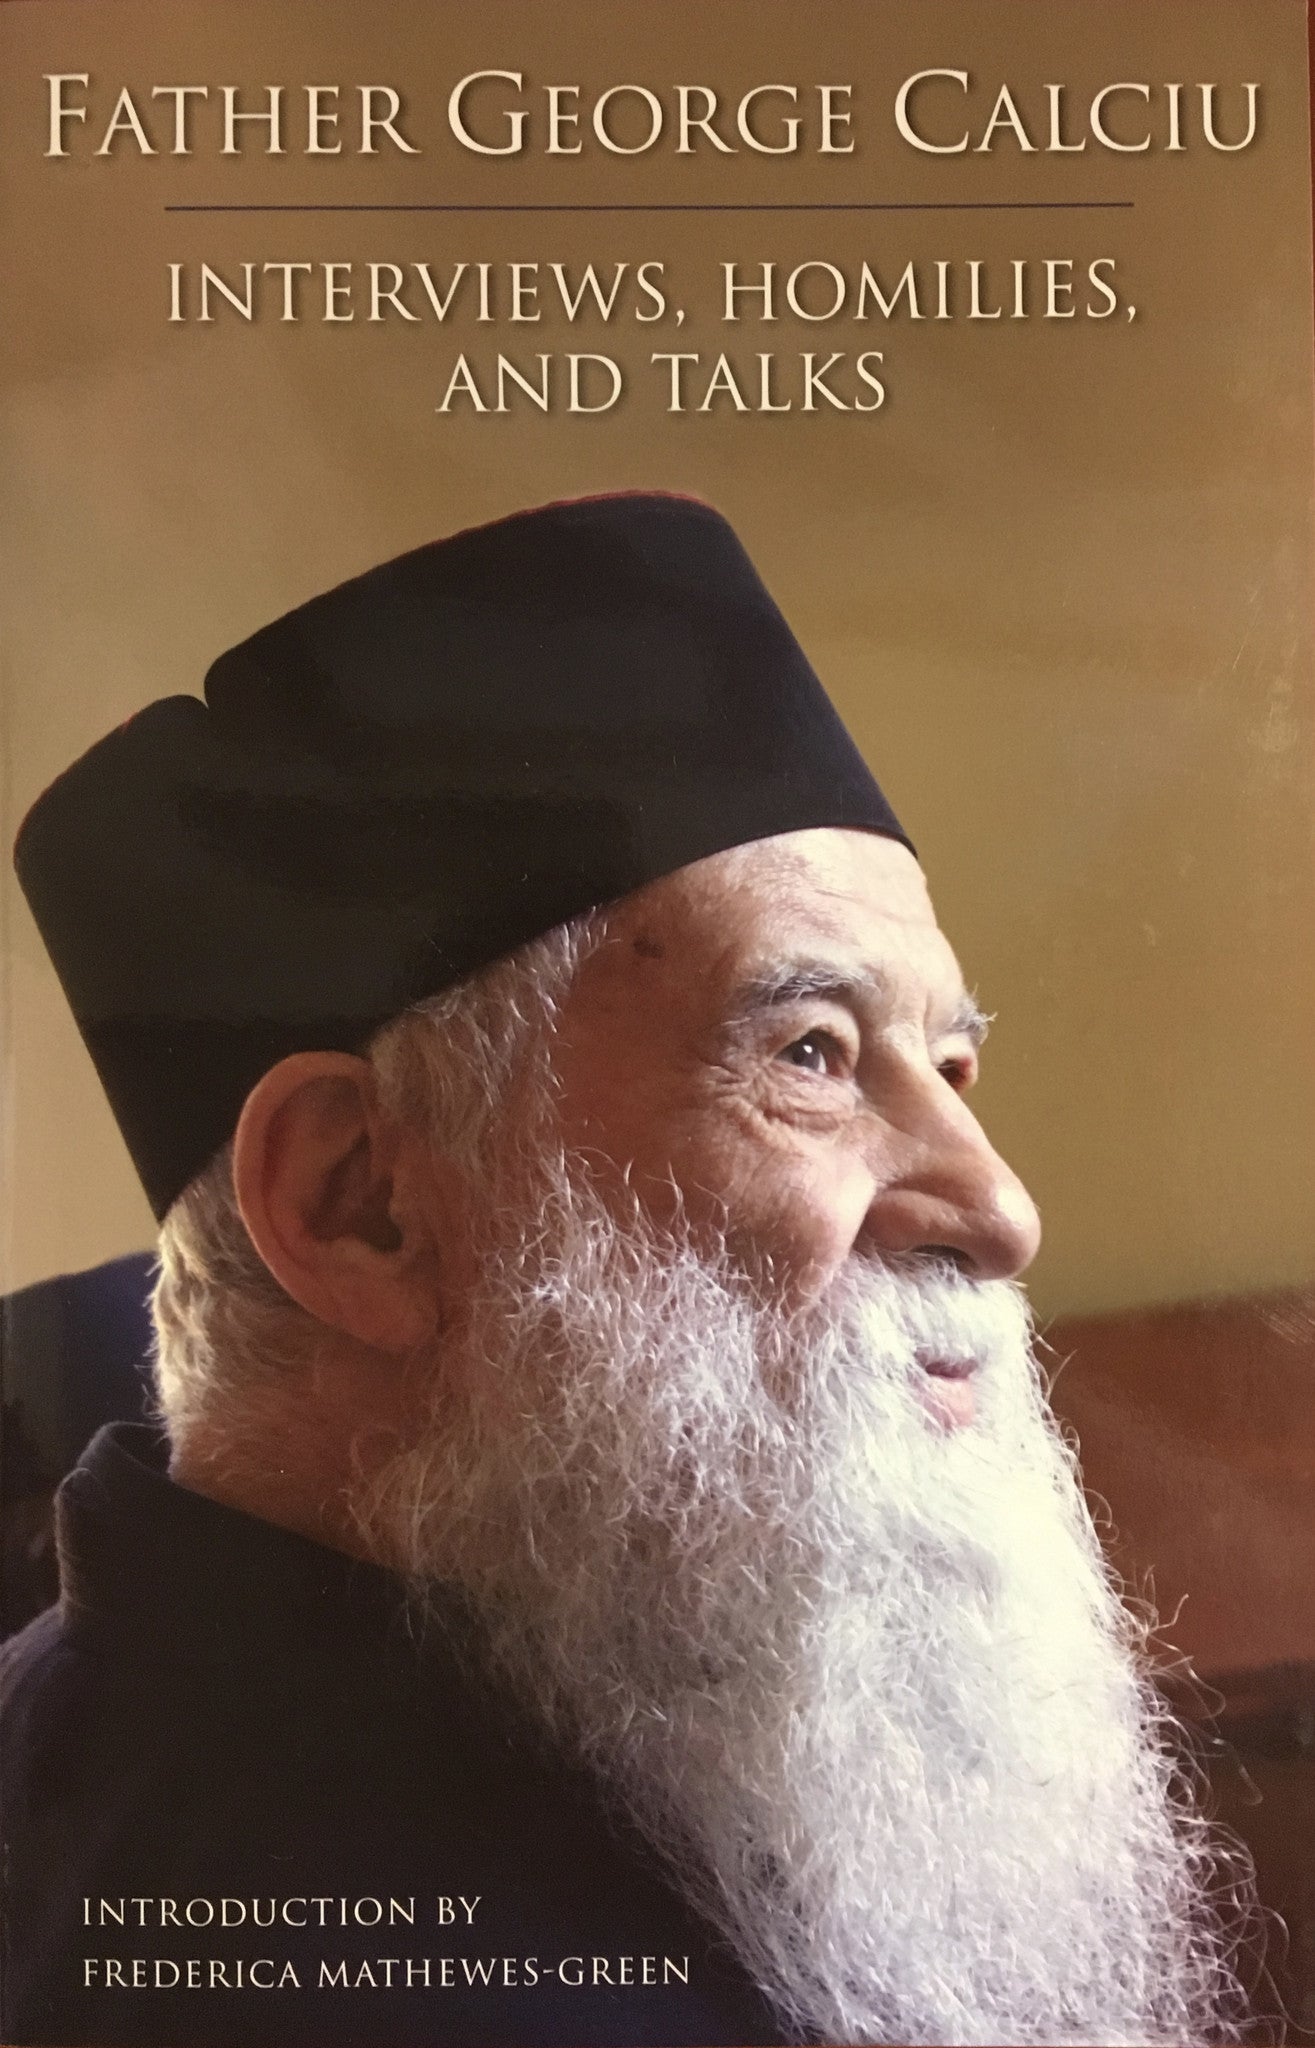 Father George Calciu: Interviews, Talks, and Homilies